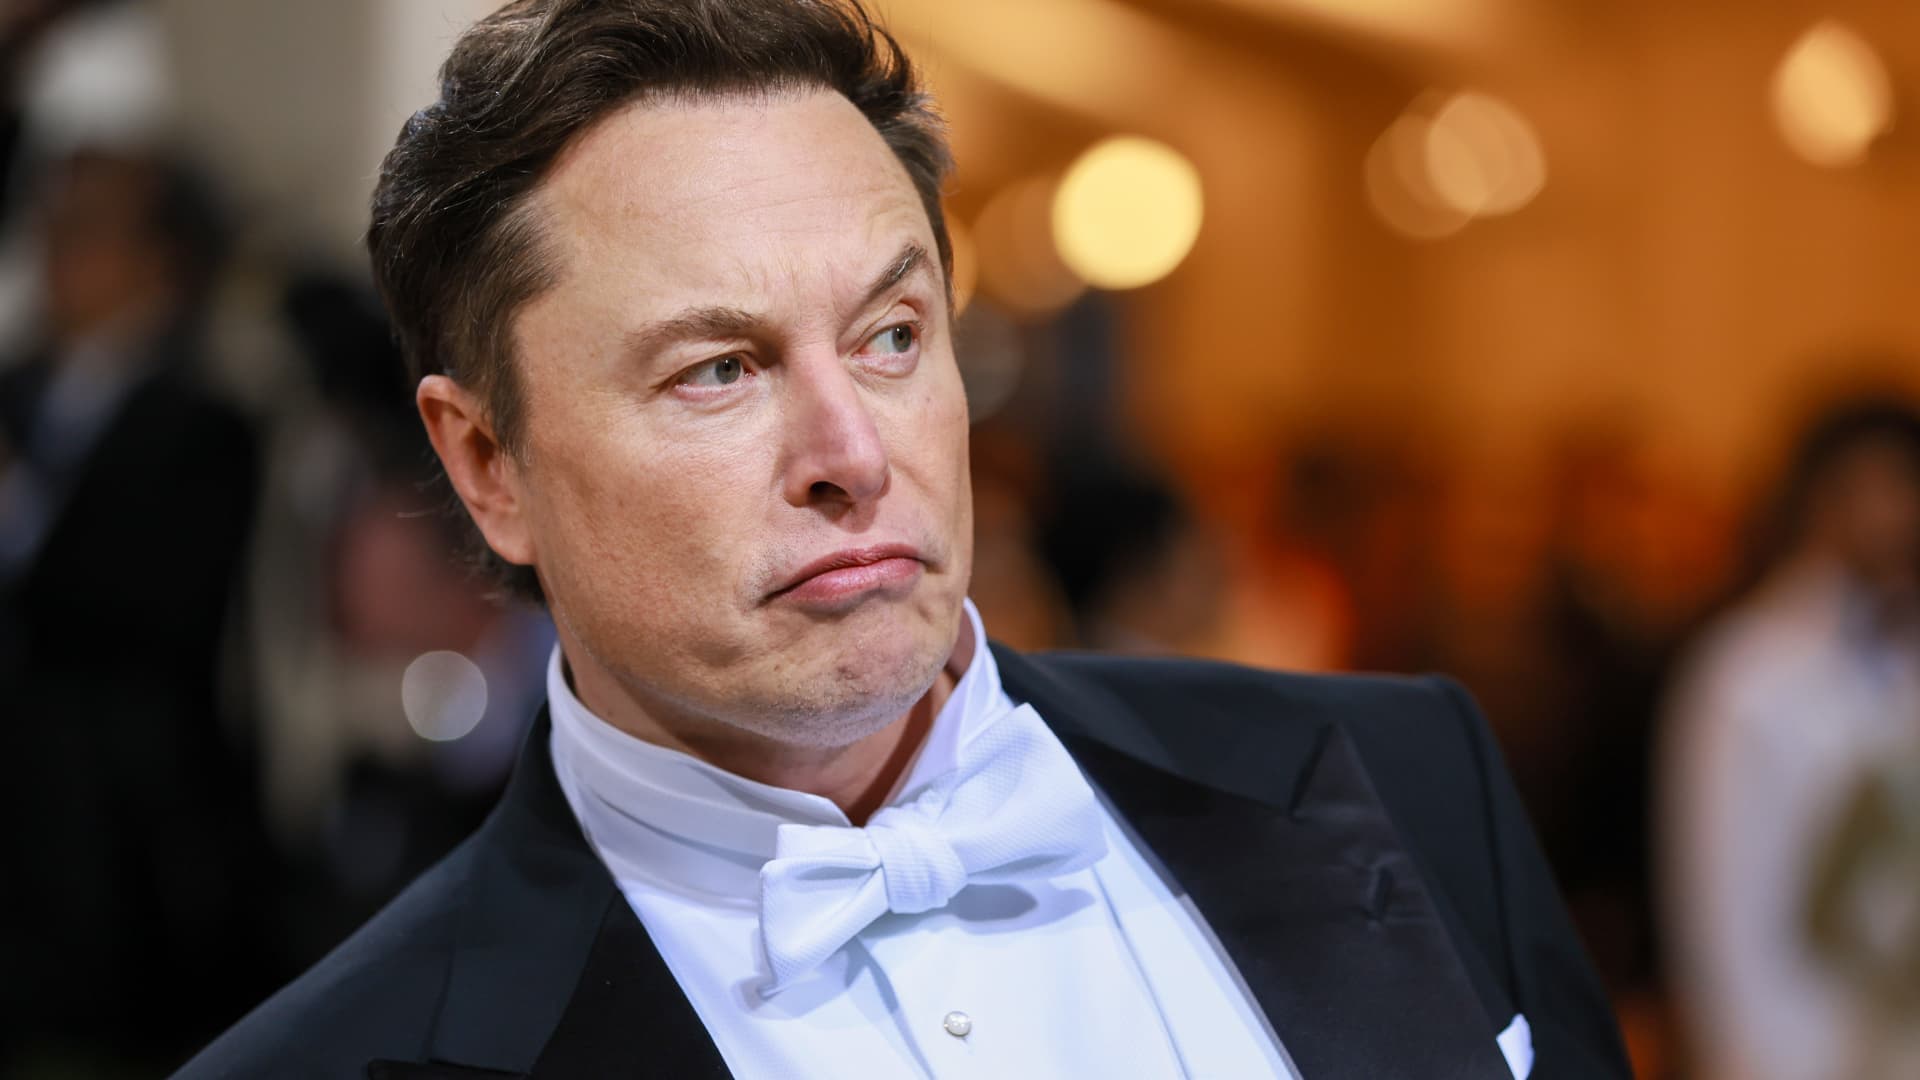 Elon Musk says it’s time for Trump to ‘sail into the sunset’ – CNBC